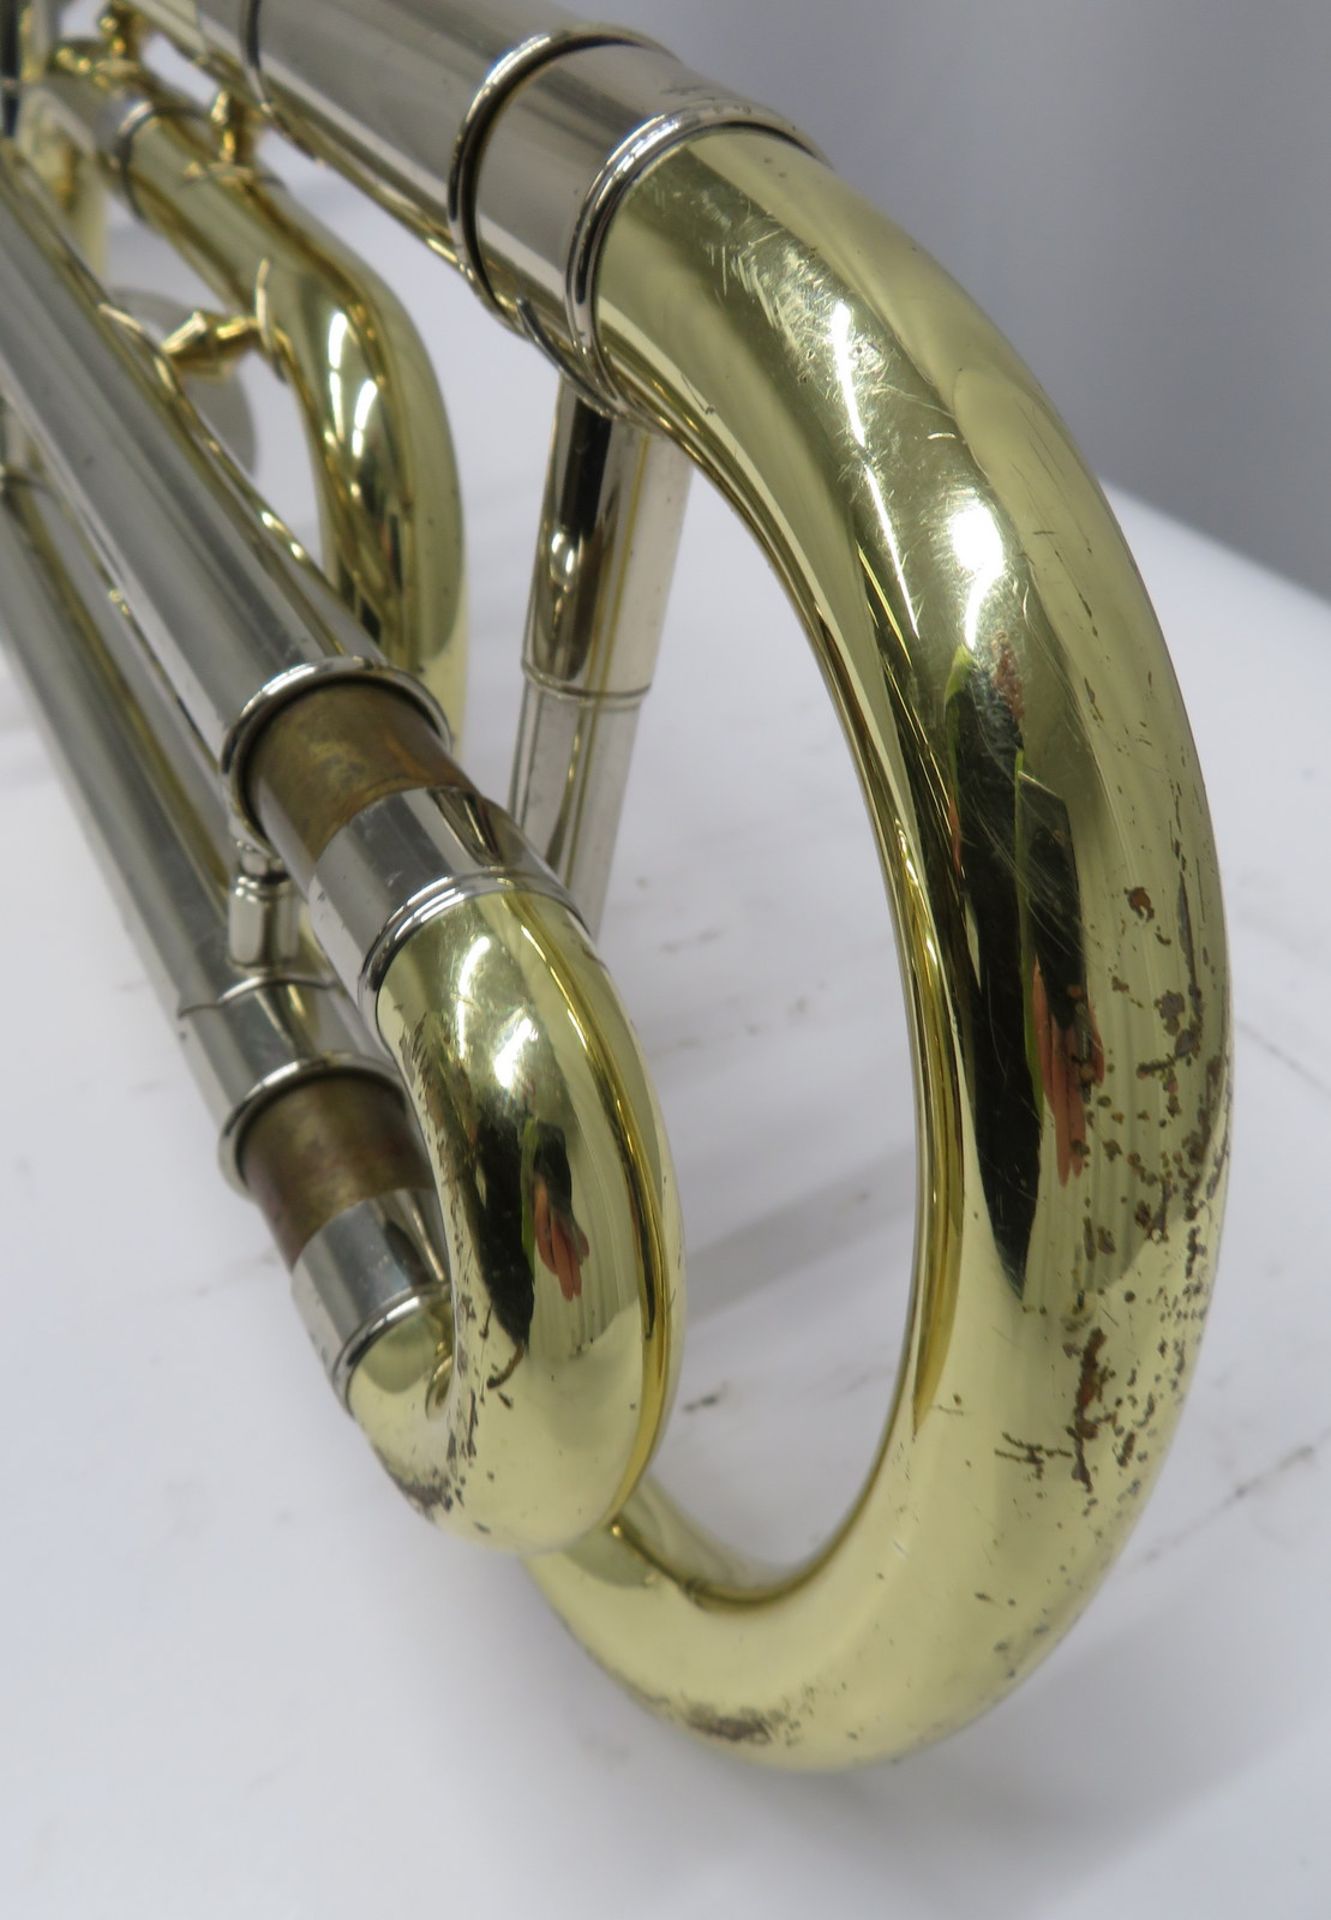 Bach Stradivarius model 42 trombone with case. Serial number: 23378. - Image 5 of 14